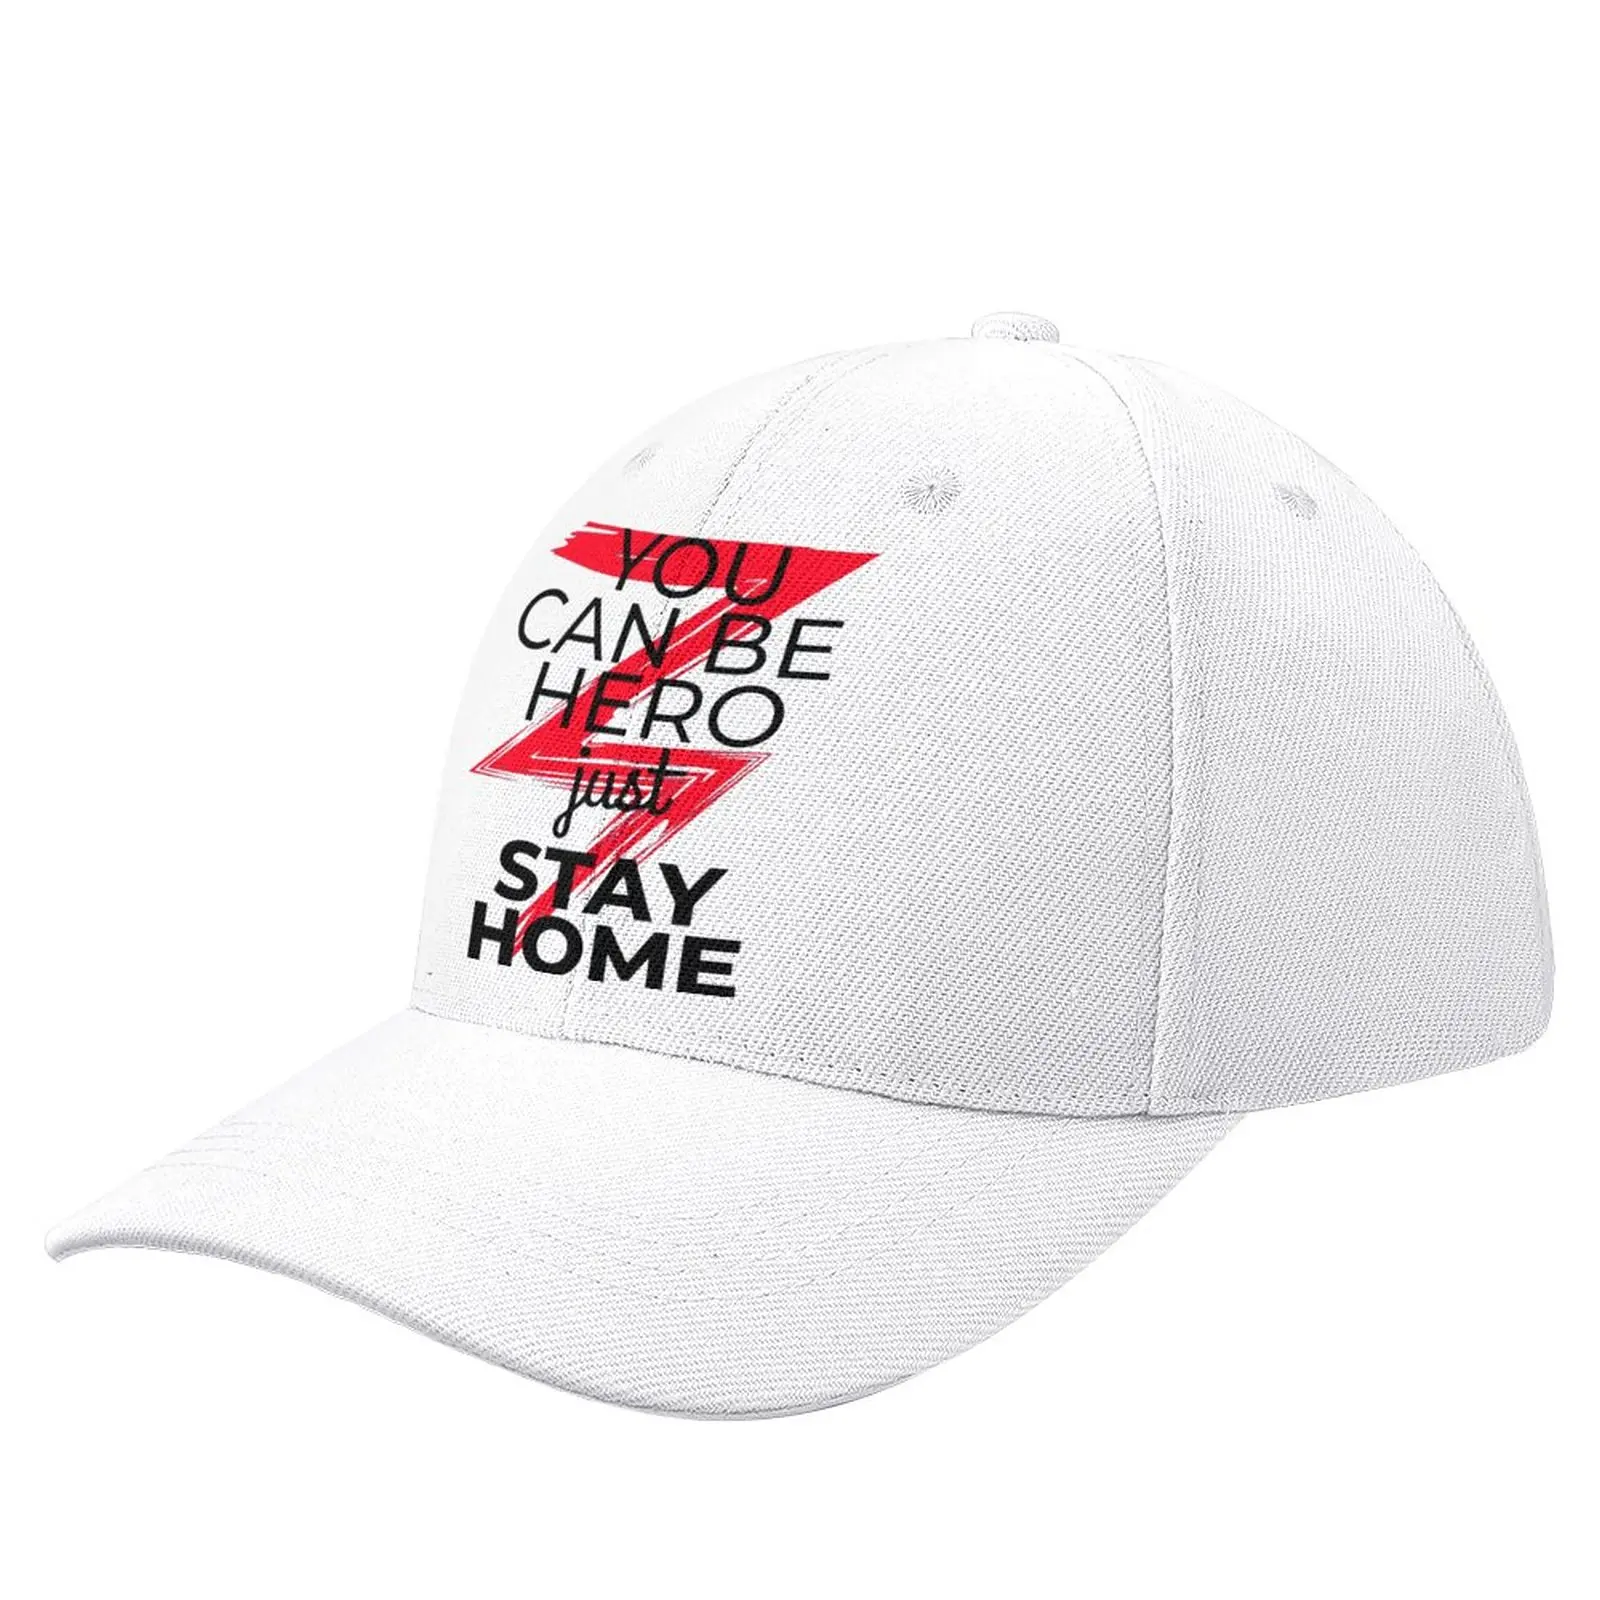 

You Can Be Hero Just Stay Home Stayg Vintage Travel Unisex Fishing Sun HatHeaddress Casquette